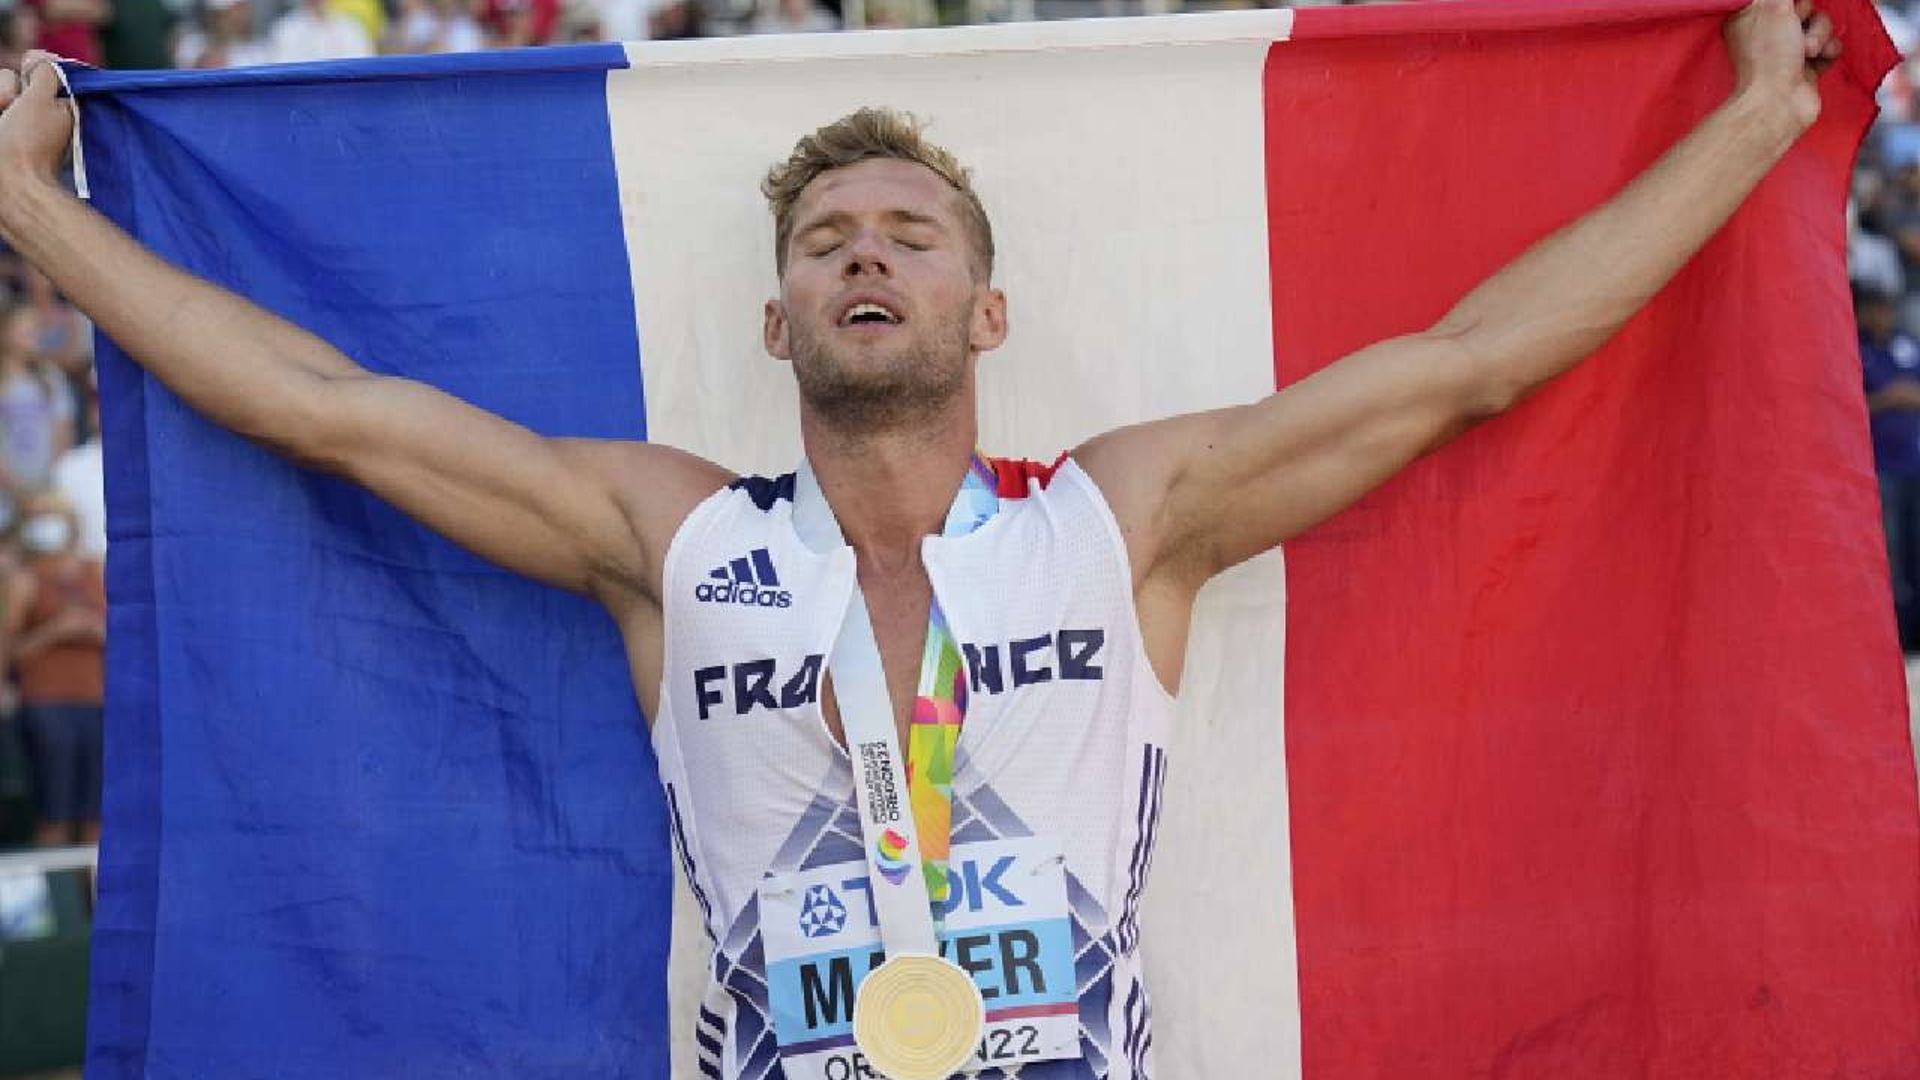 Kevin Mayer holding the French flag at Oregon 2022 (Mayer in a file photo)